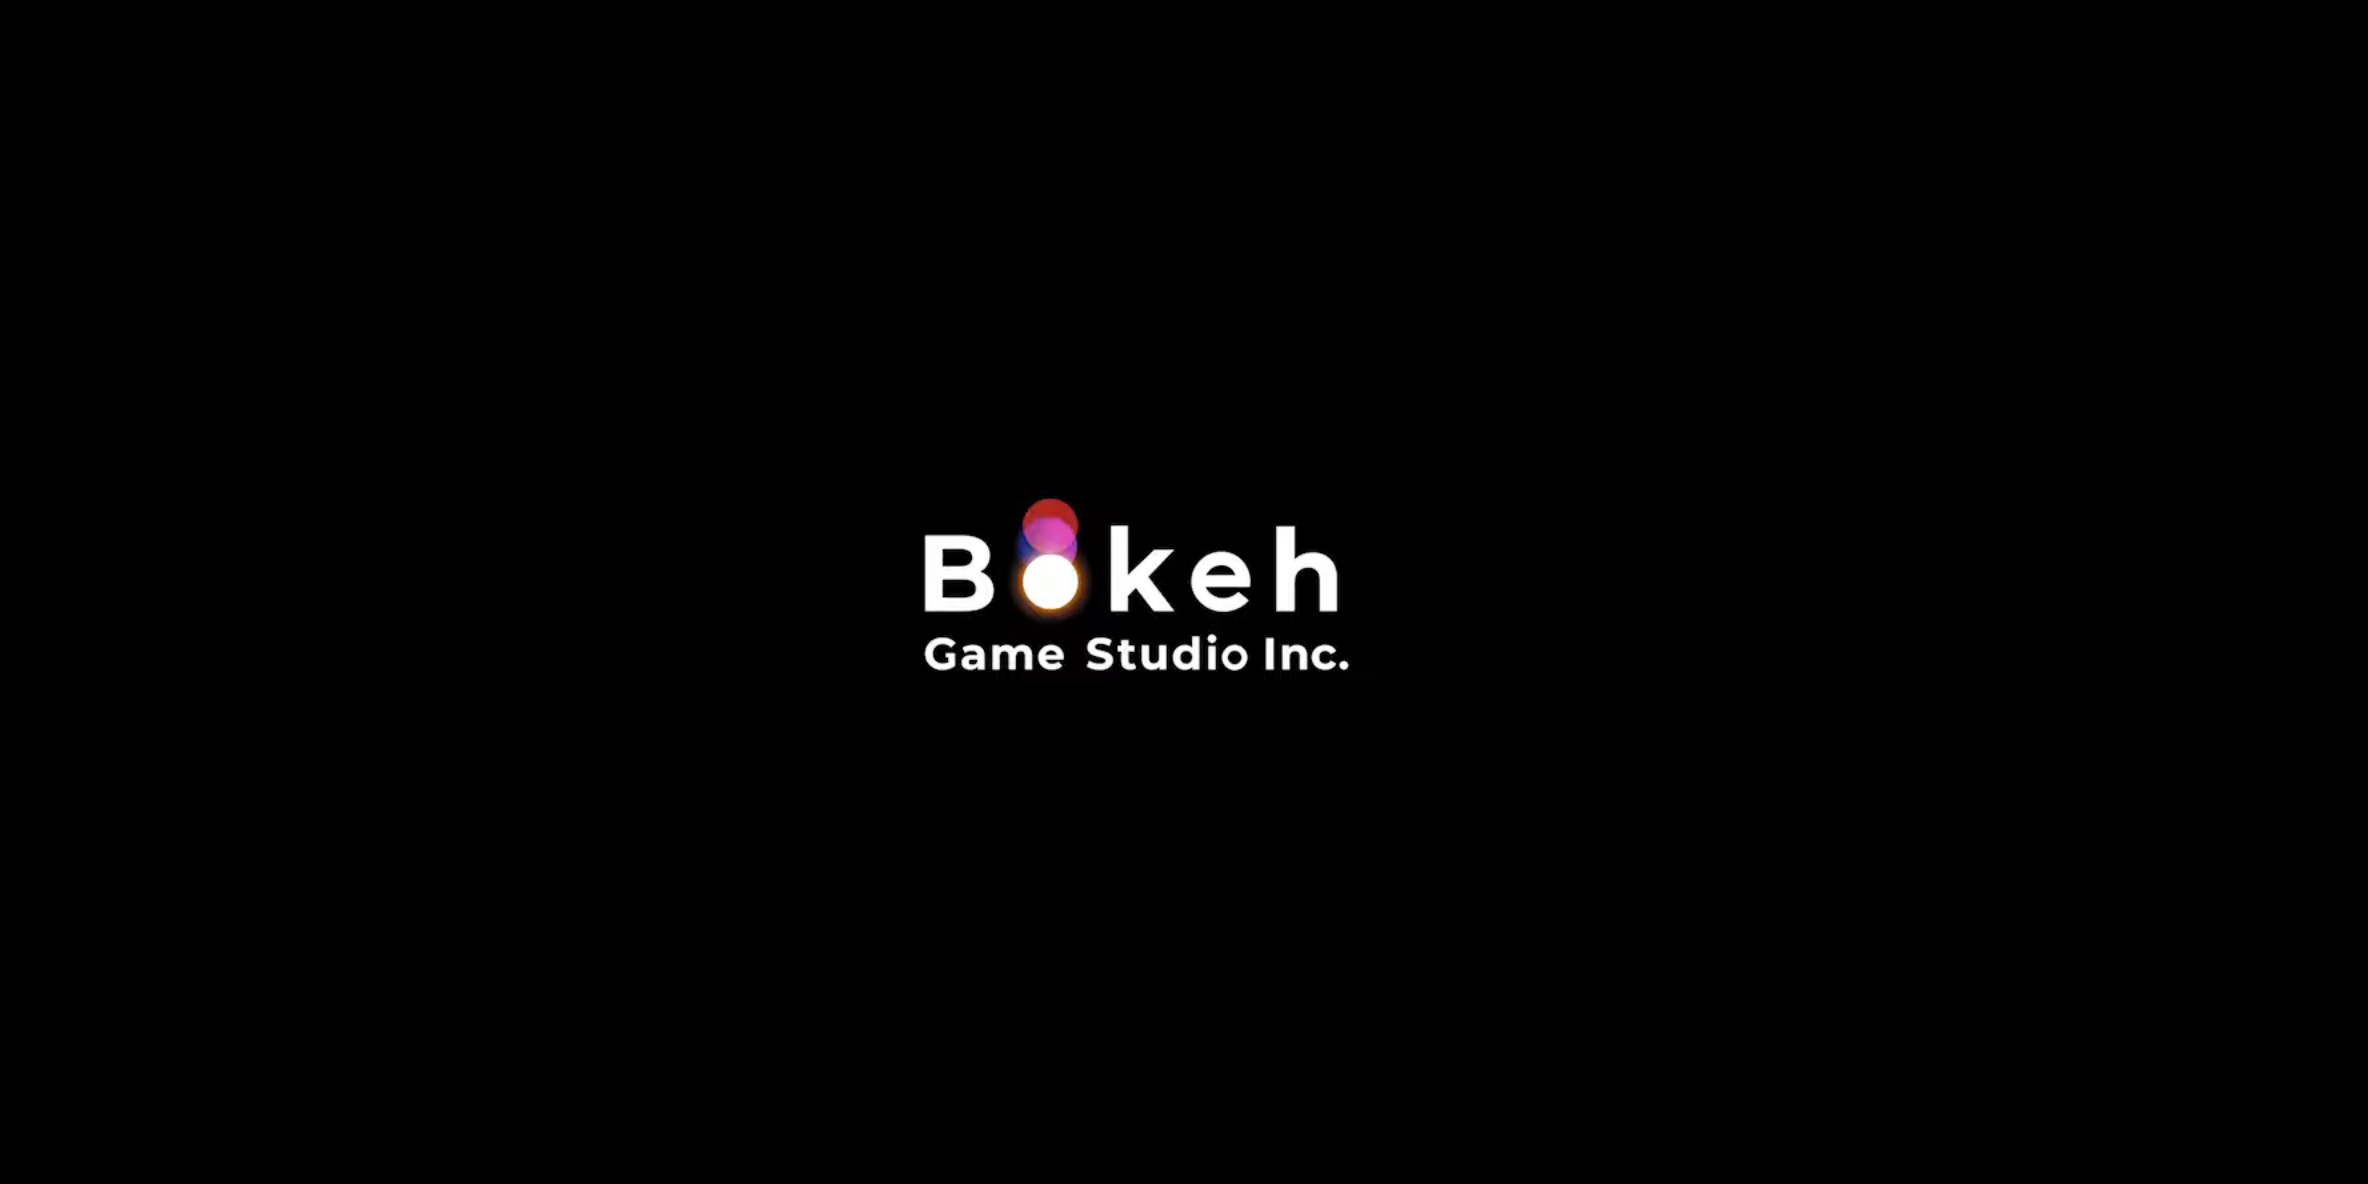 Image for Former PlayStation devs reveal first info on new horror title from Bokeh Game Studios